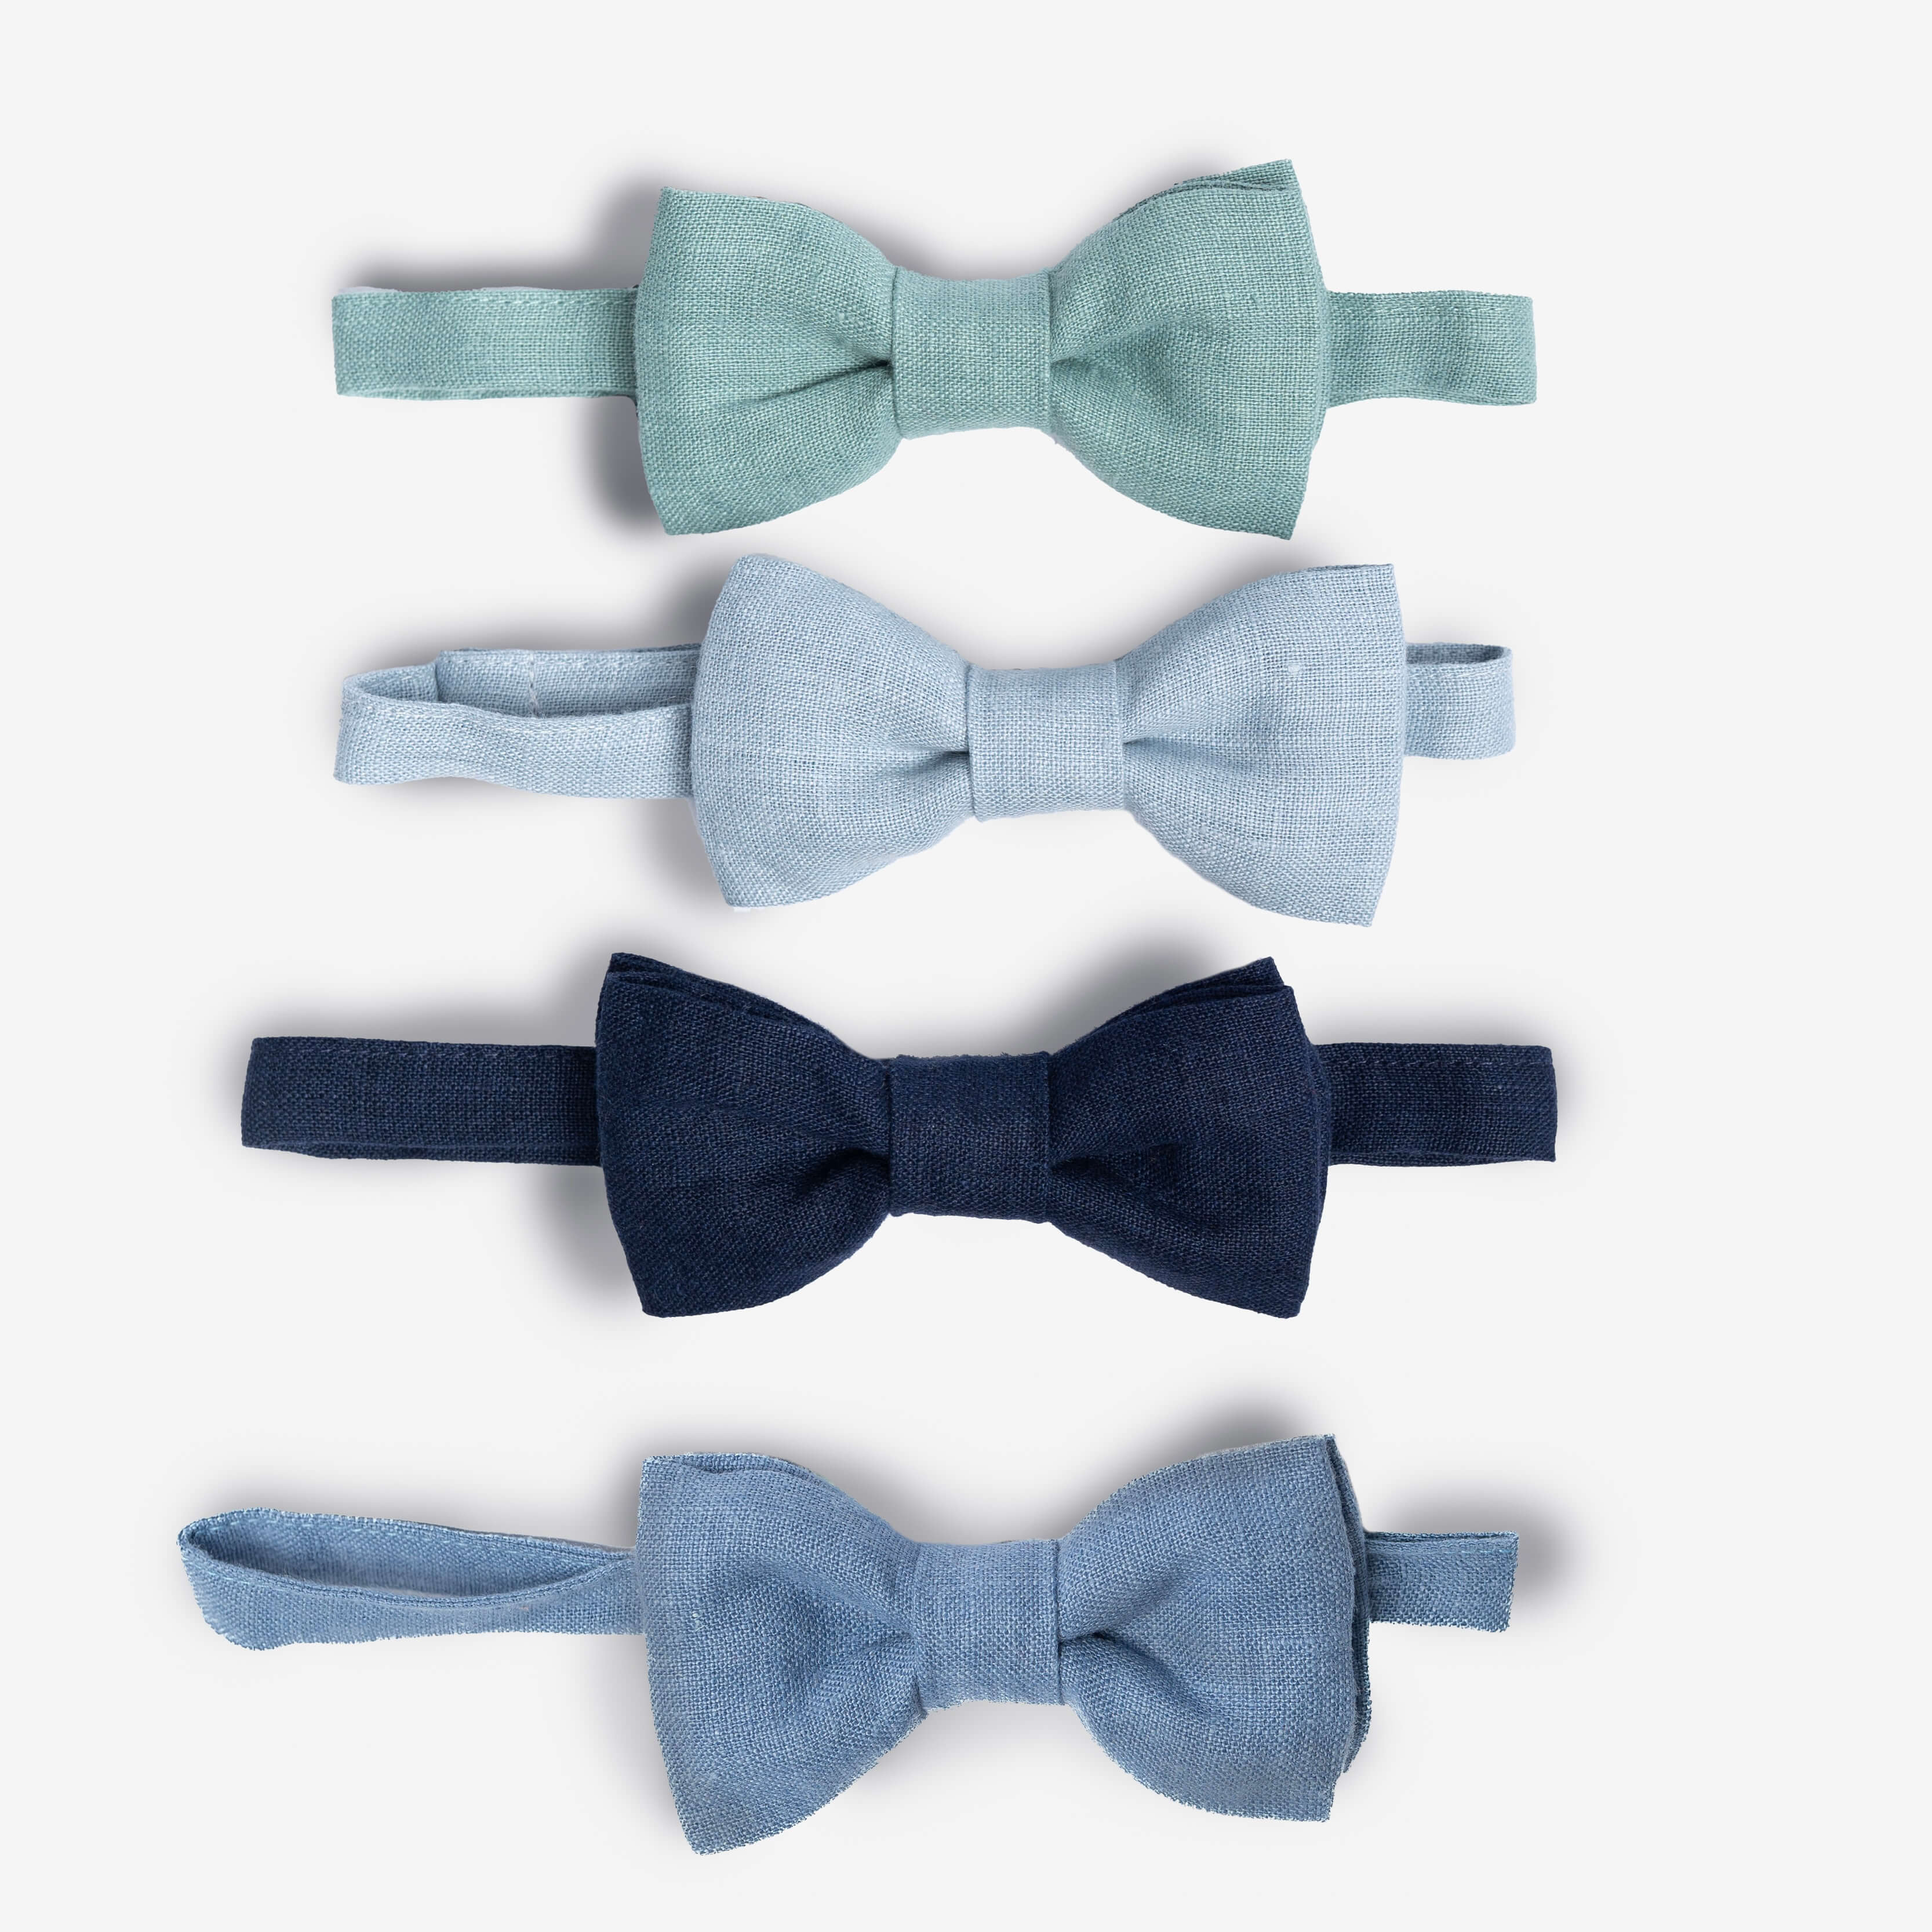 Selection of blue bow ties in dusty turquoise, glacier, navy and dusty blue